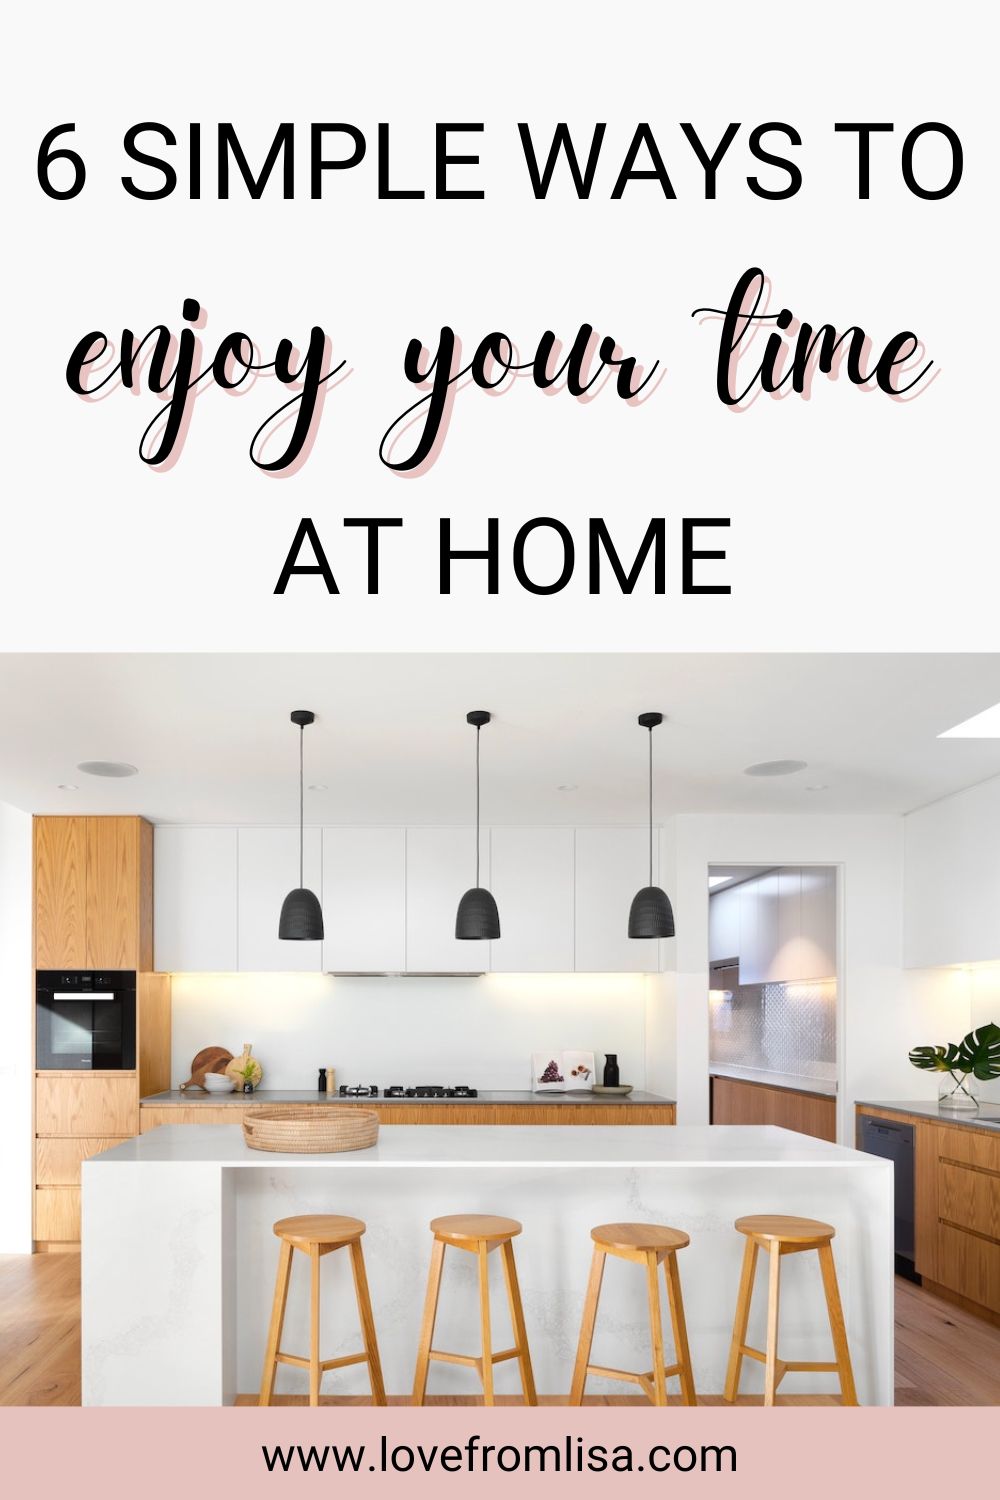 6 simple ways to enjoy your time at home pinterest graphic